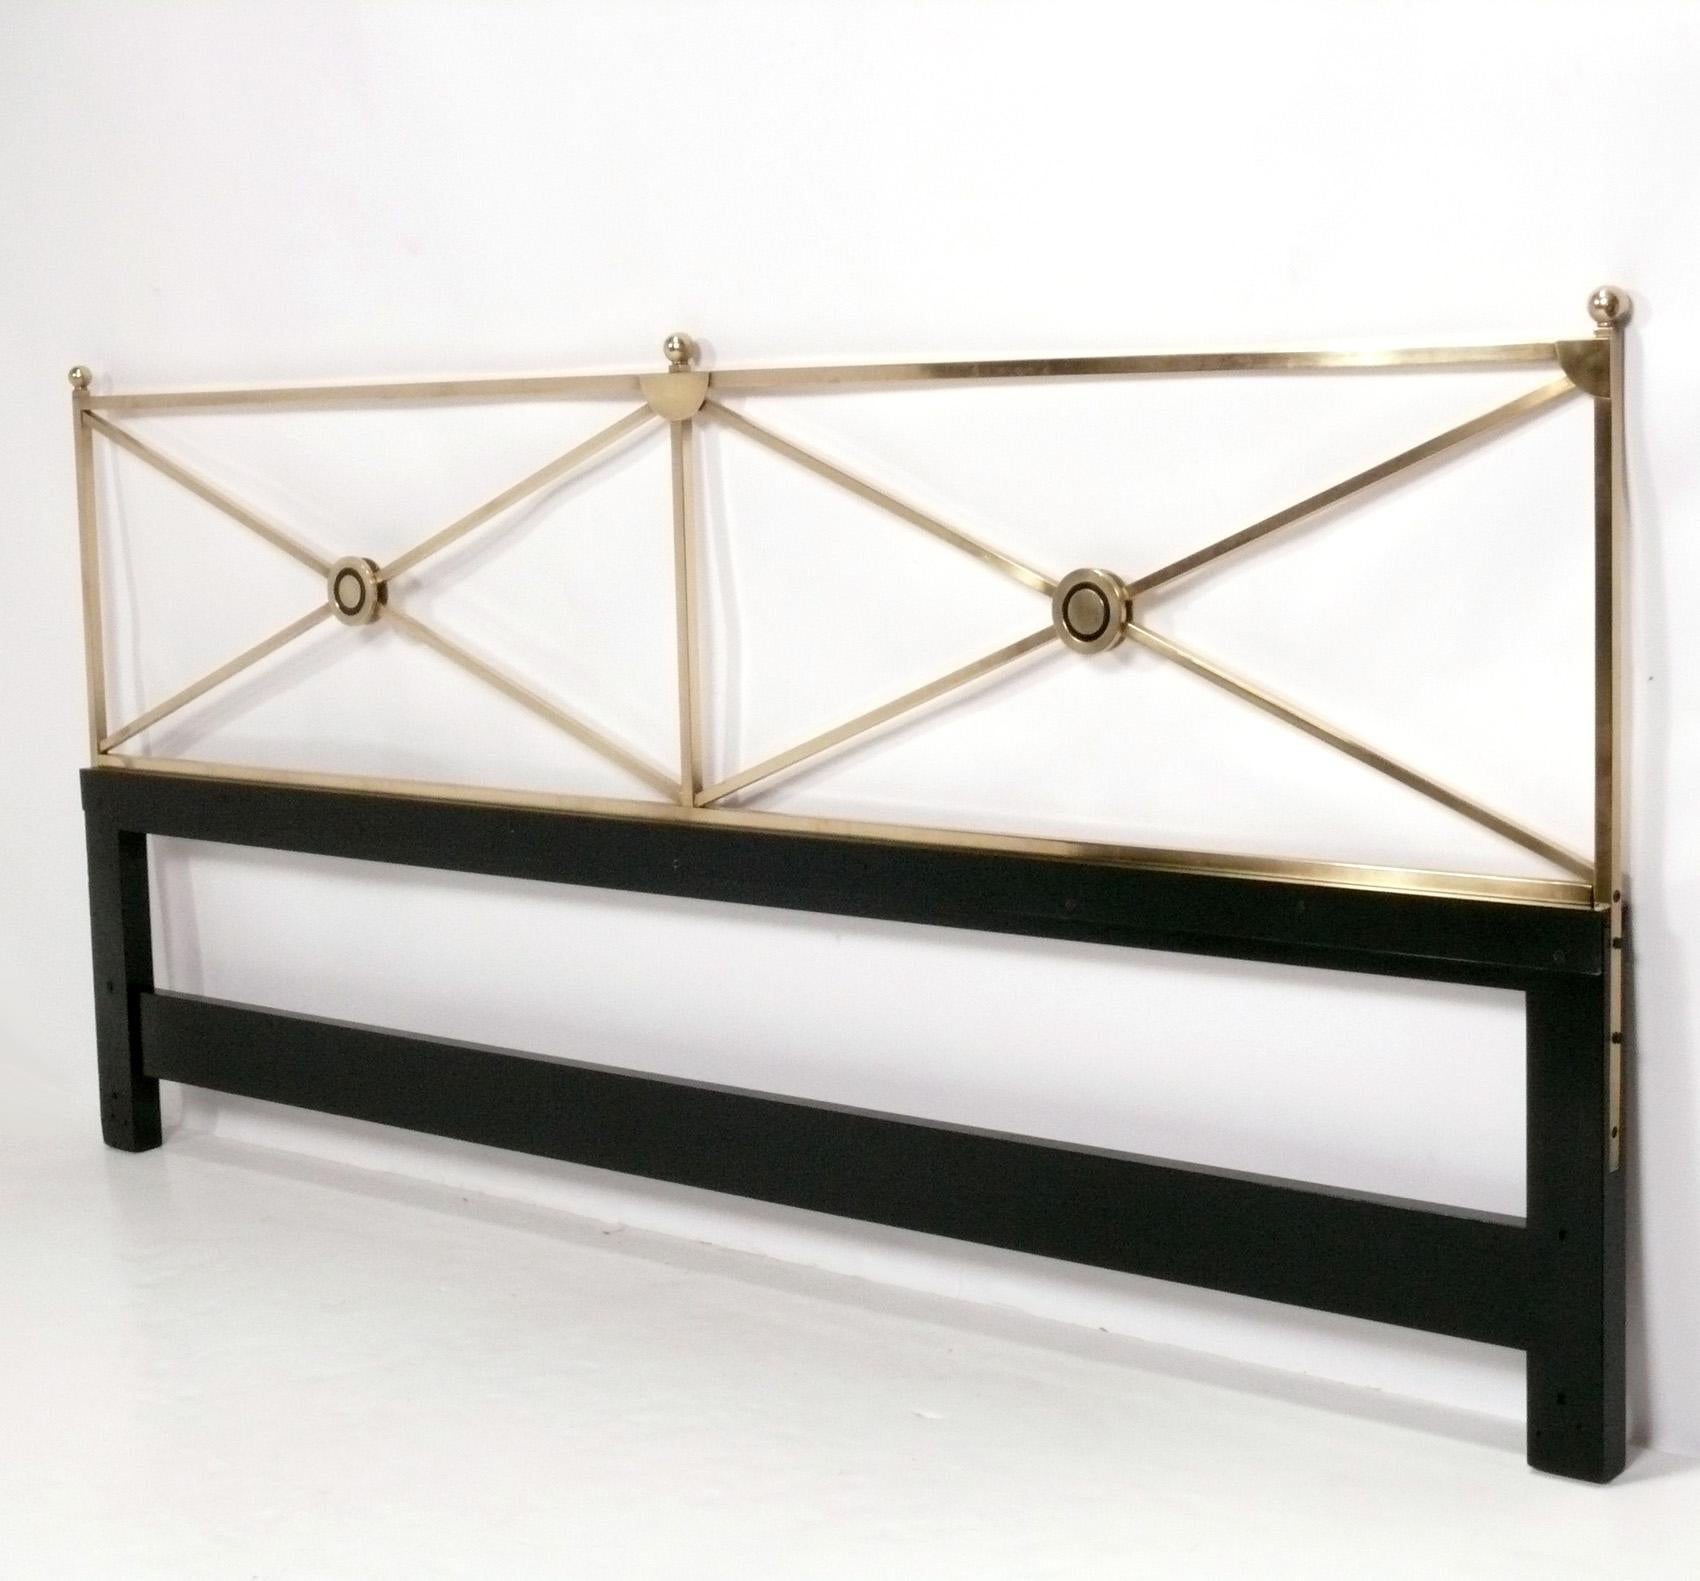 Elegant Brass X Form King Size Headboard by Baker, signed, American, circa 1960s. The brass has been hand polished and lacquered and the wood base repainted black at some point. It can be used with a king size mattress with a standard Hollywood